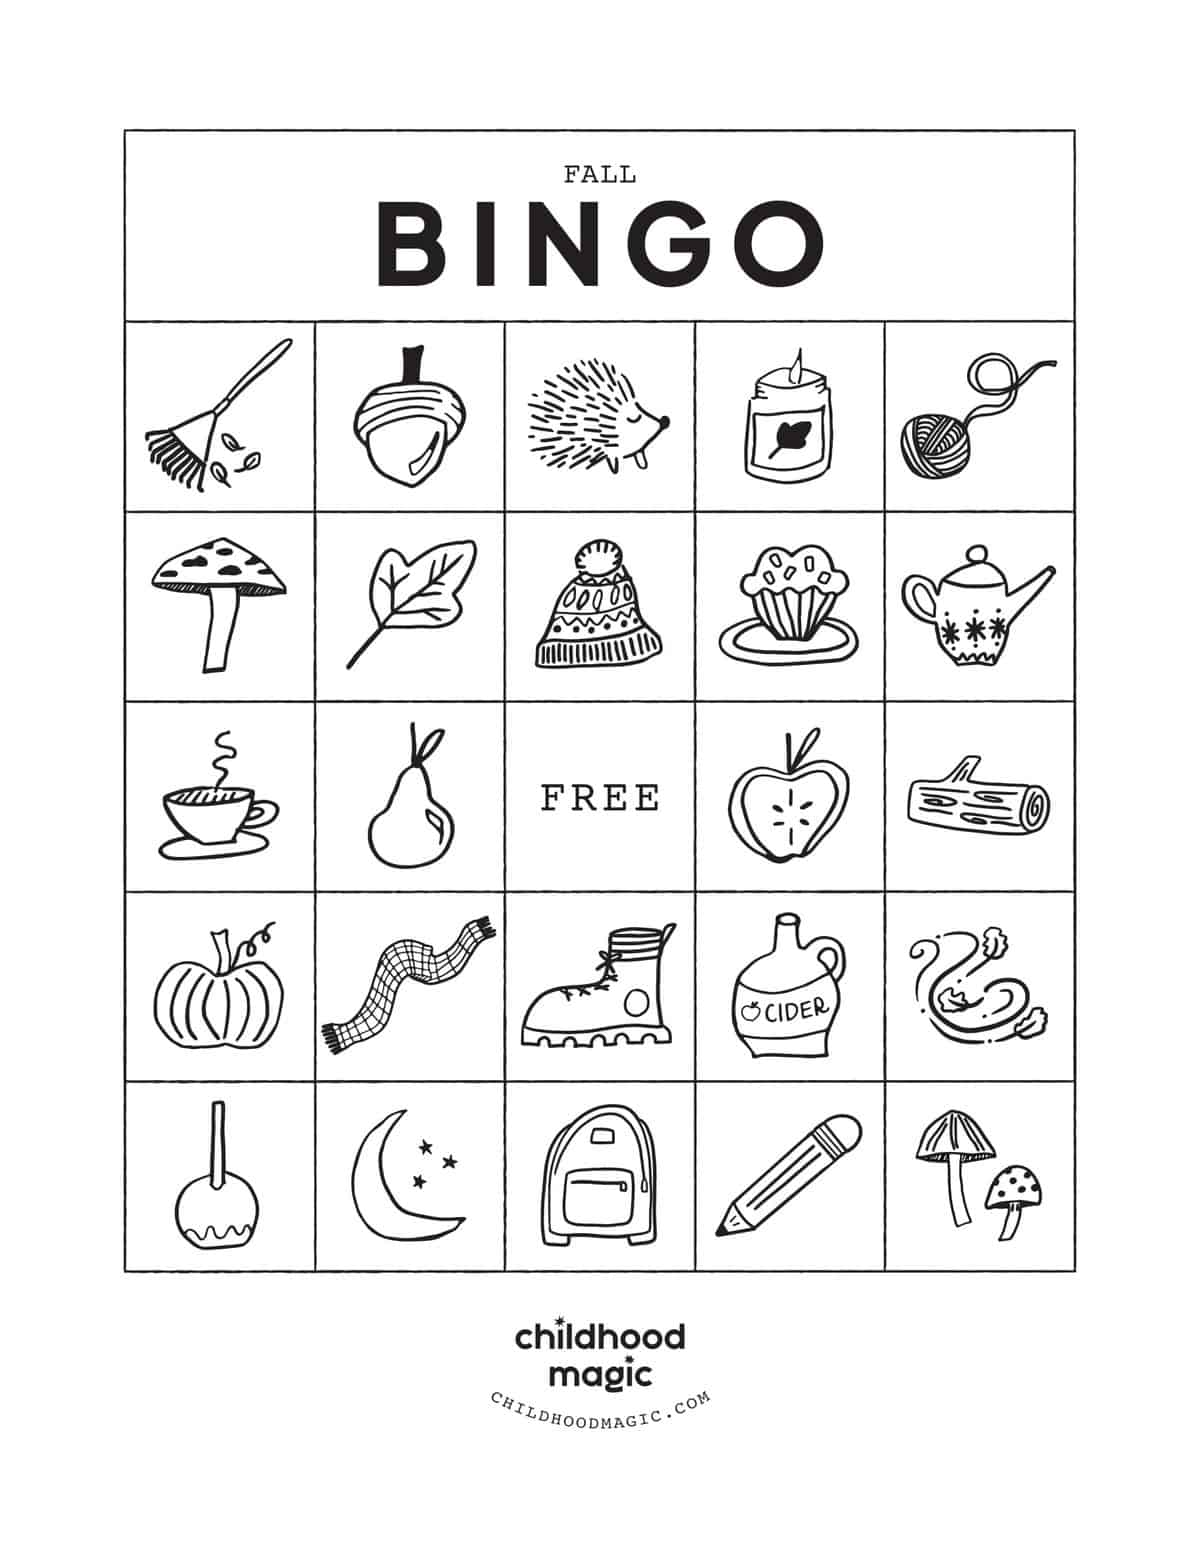 bingo card in black and white with fall-themed icons. 